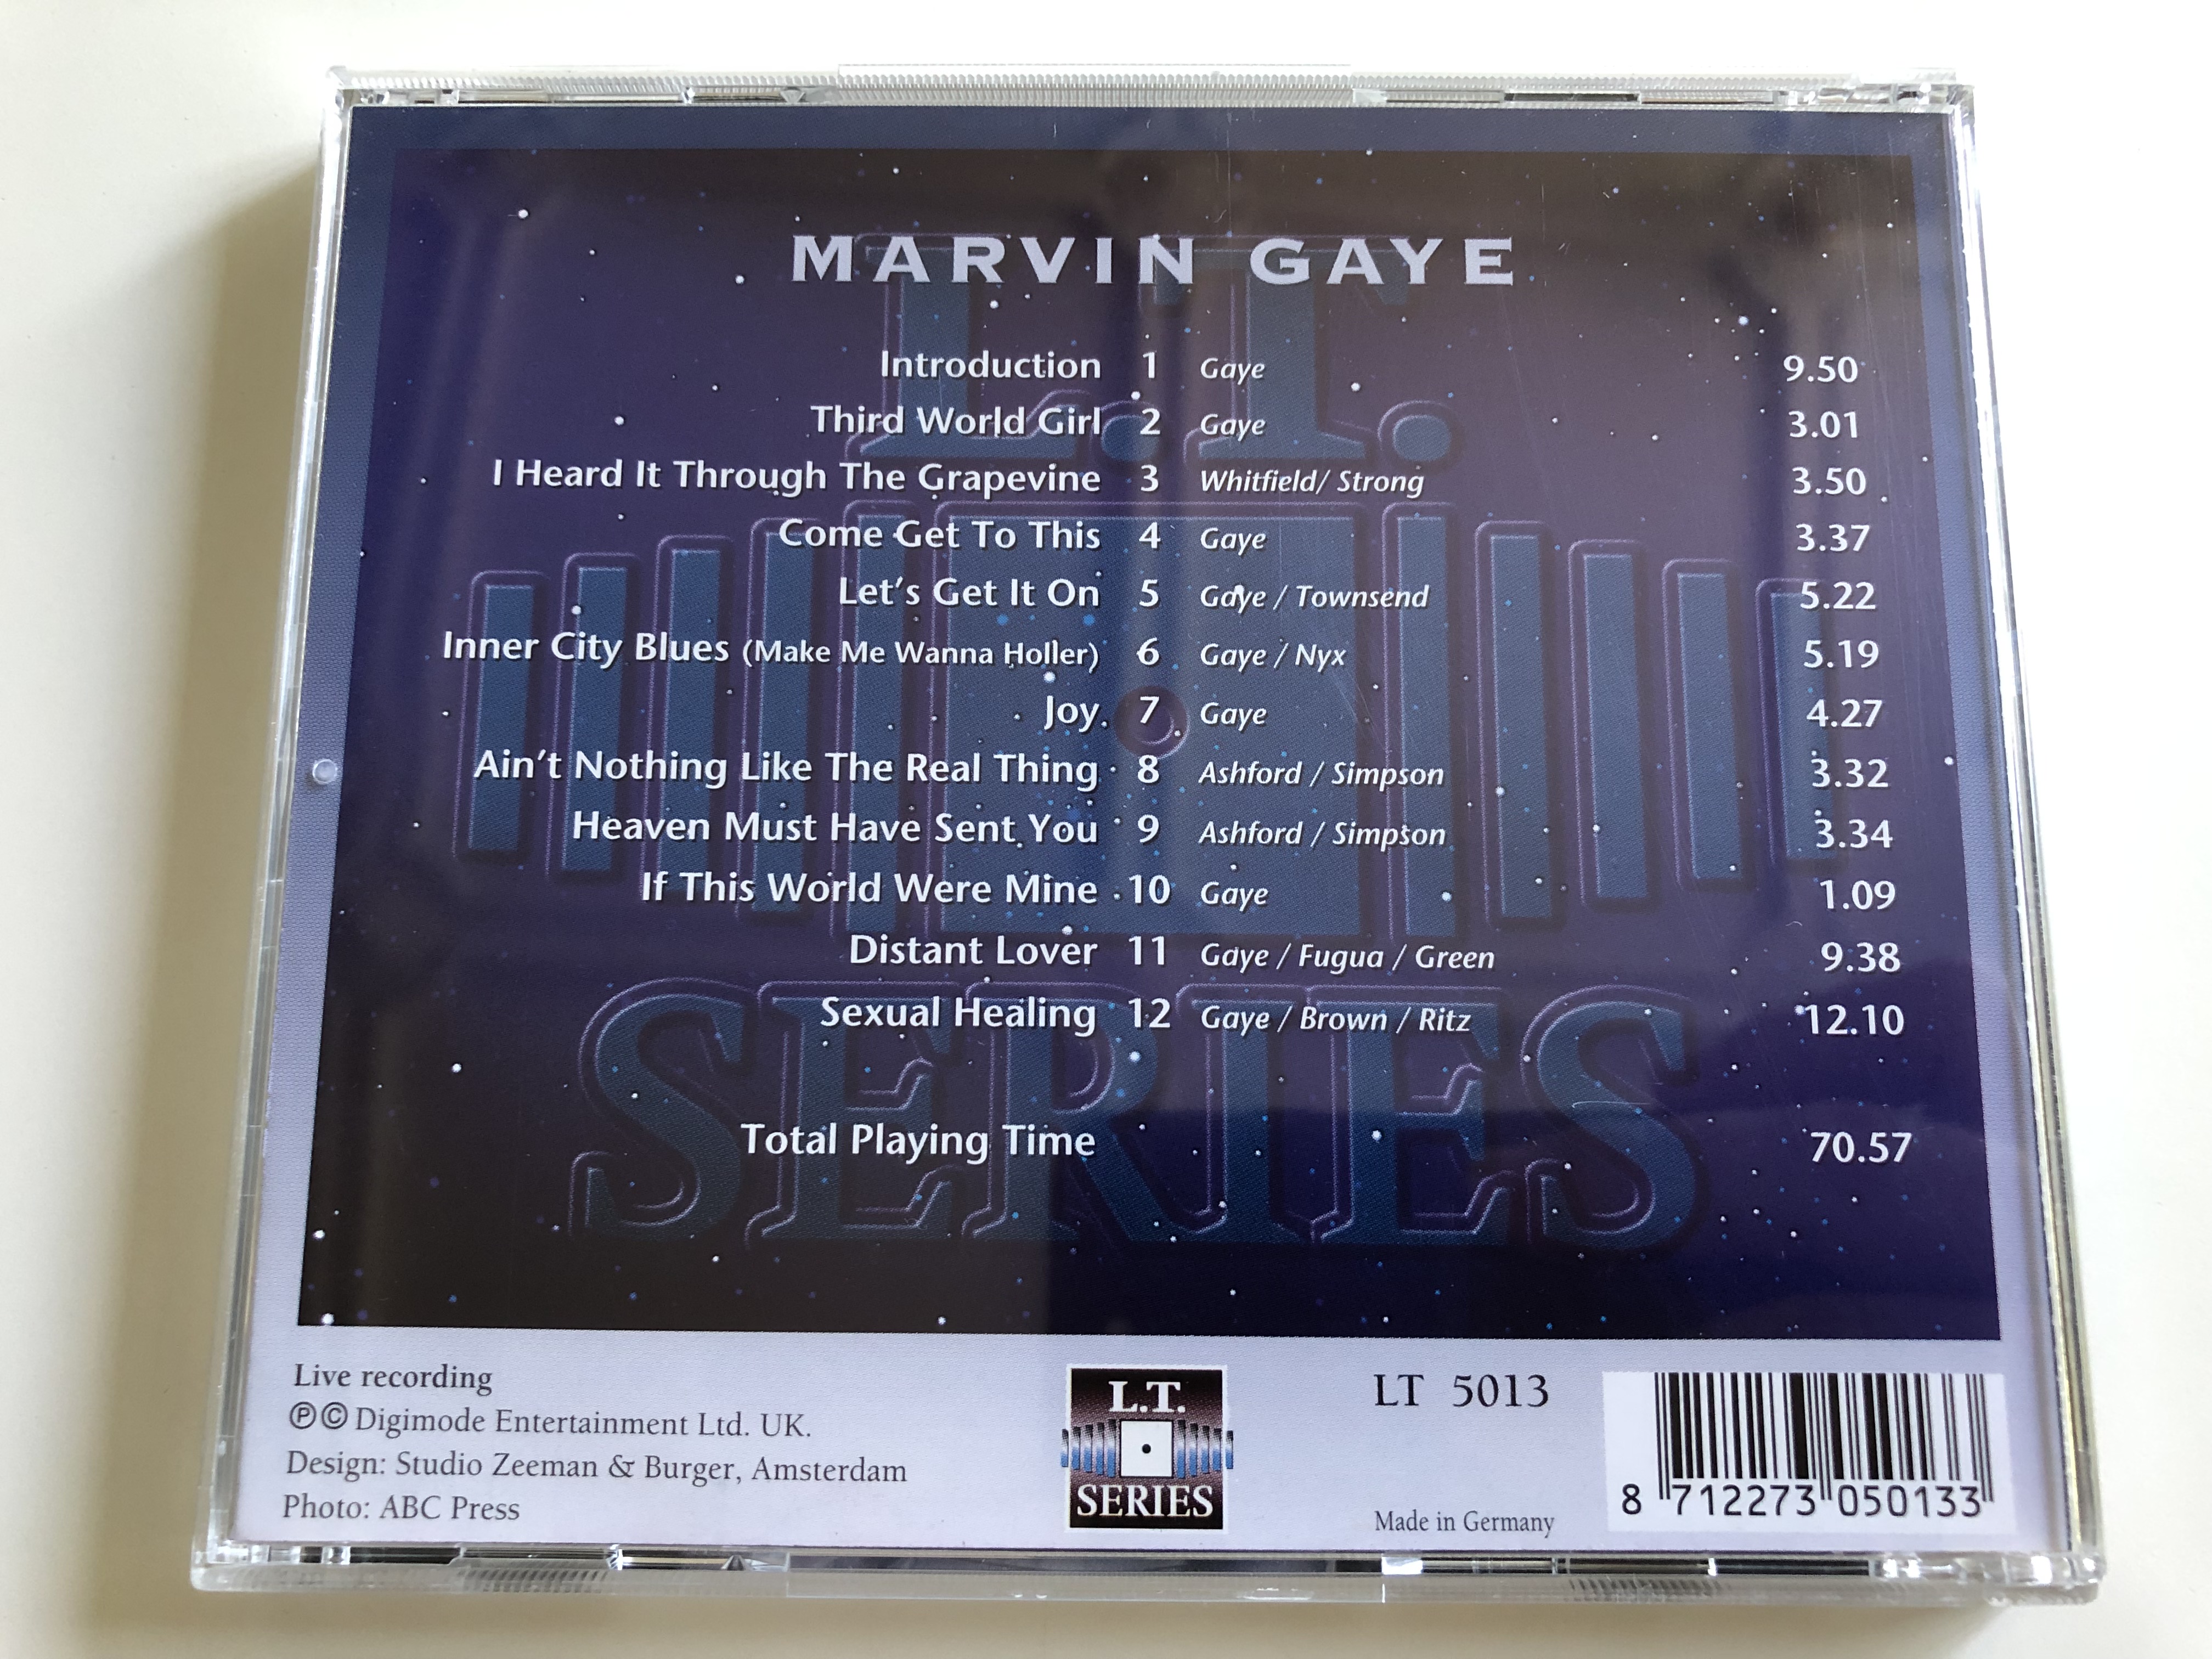 marvin-gaye-sexual-healing-i-heard-it-through-the-grapevine-distant-lover-heaven-must-have-sent-you-let-s-get-it-on-live-recording-audio-cd-lt-5013-4-.jpg